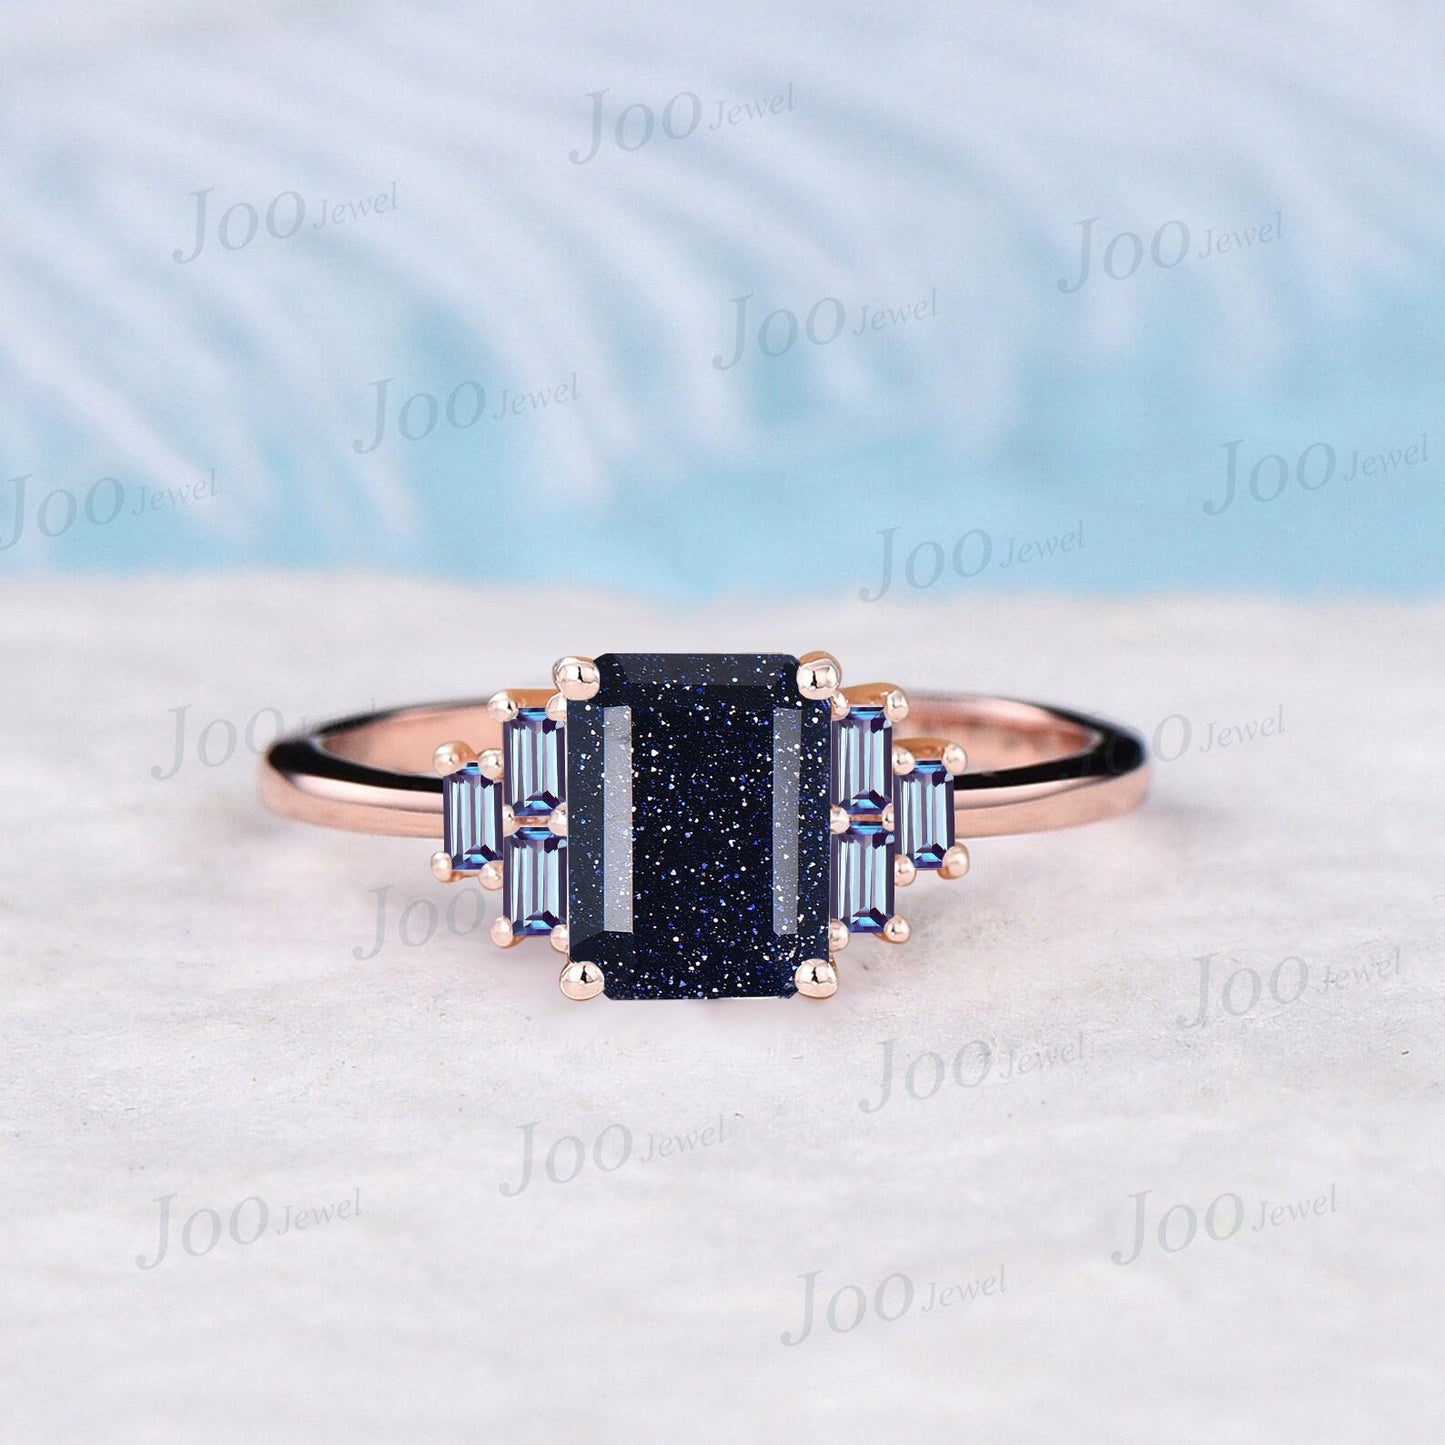 2ct Emerald Cut Galaxy Blue Sandstone Ring Rose Gold Gemstone Jewelry Vintage Cluster Baguette Alexandrite Ring Personalized Gift for Women